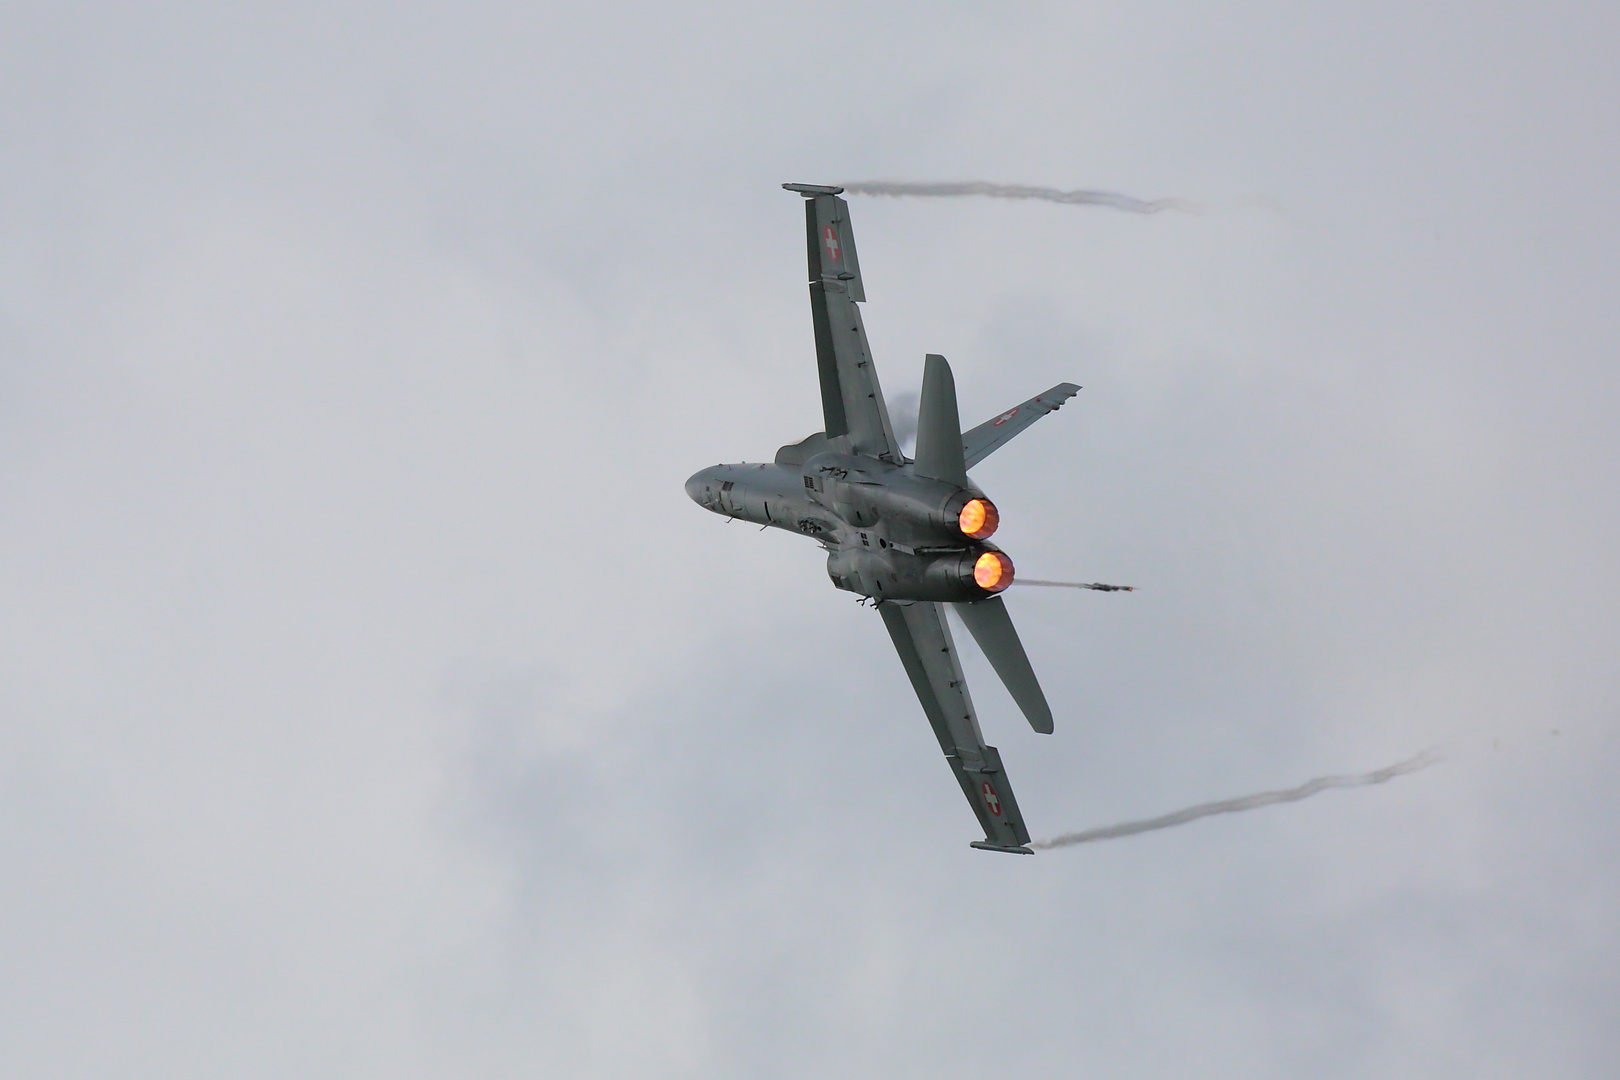 F/A-18 Solo Display 2